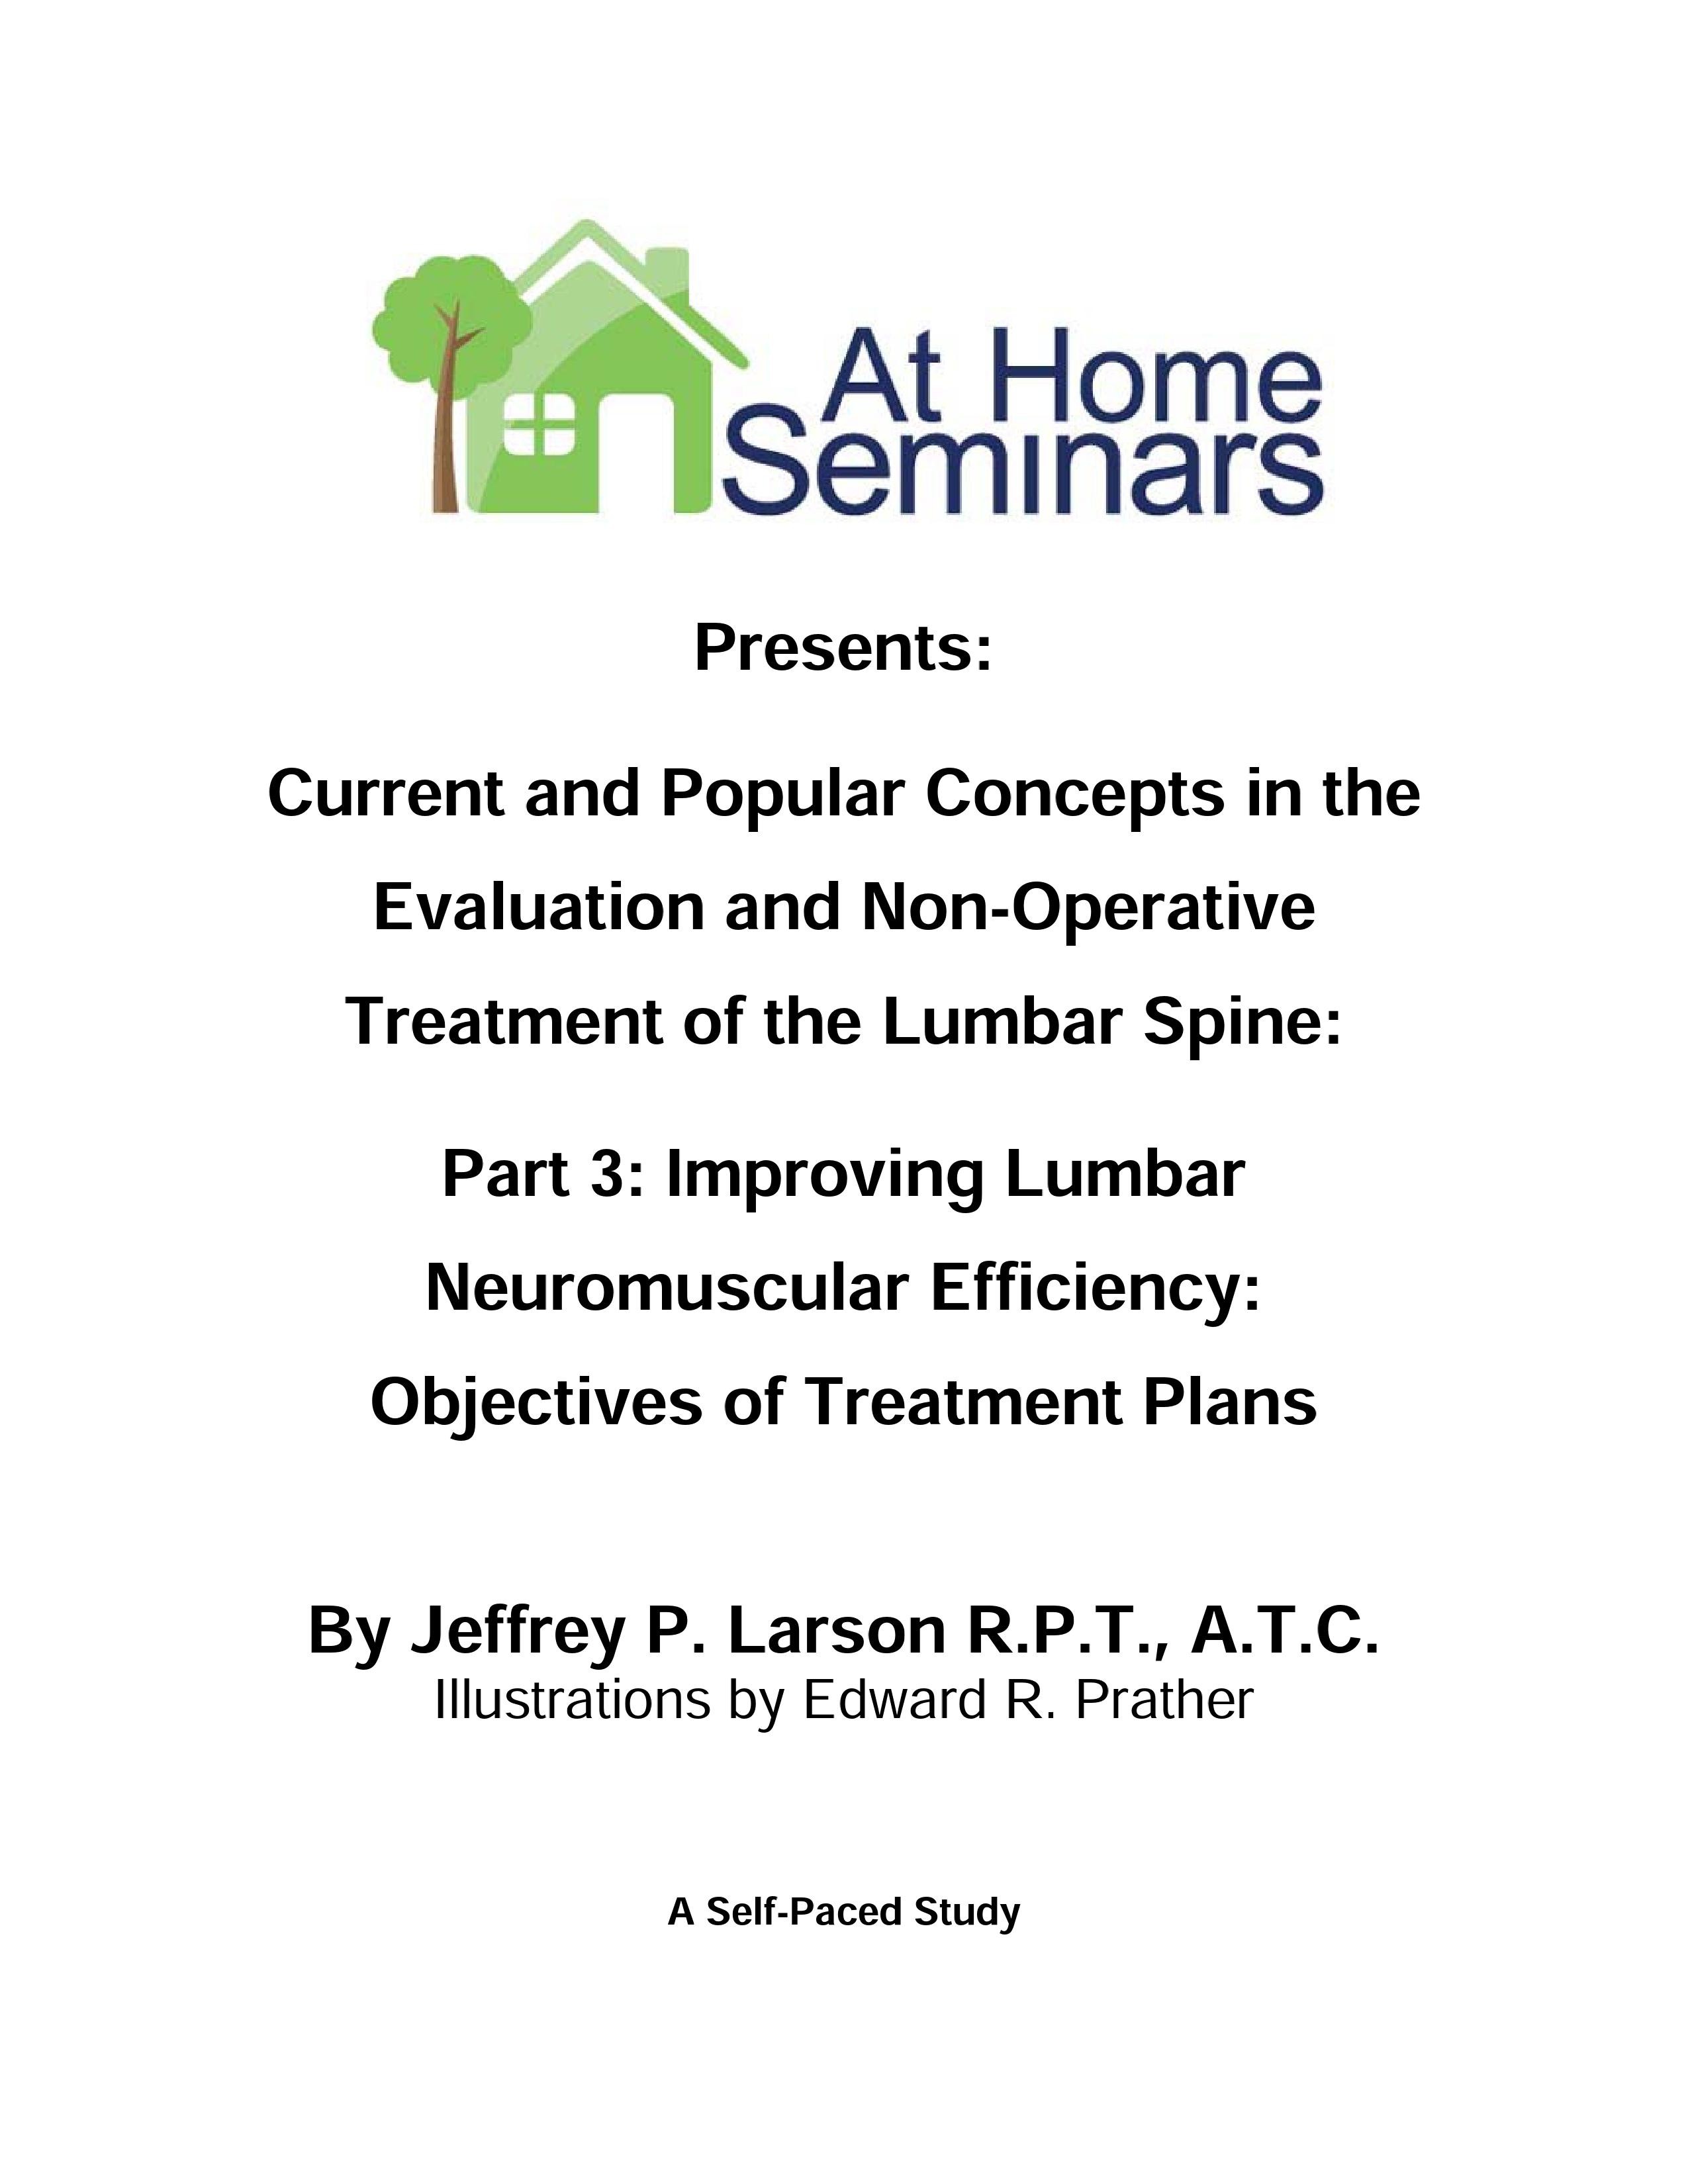 Current & Popular Concepts in the Evaluation and Non-Operative Treatment of the Lumbar Spine: Part 3: Improving Lumbar Neuromuscular Efficiency: Objectives of Treatment Plans